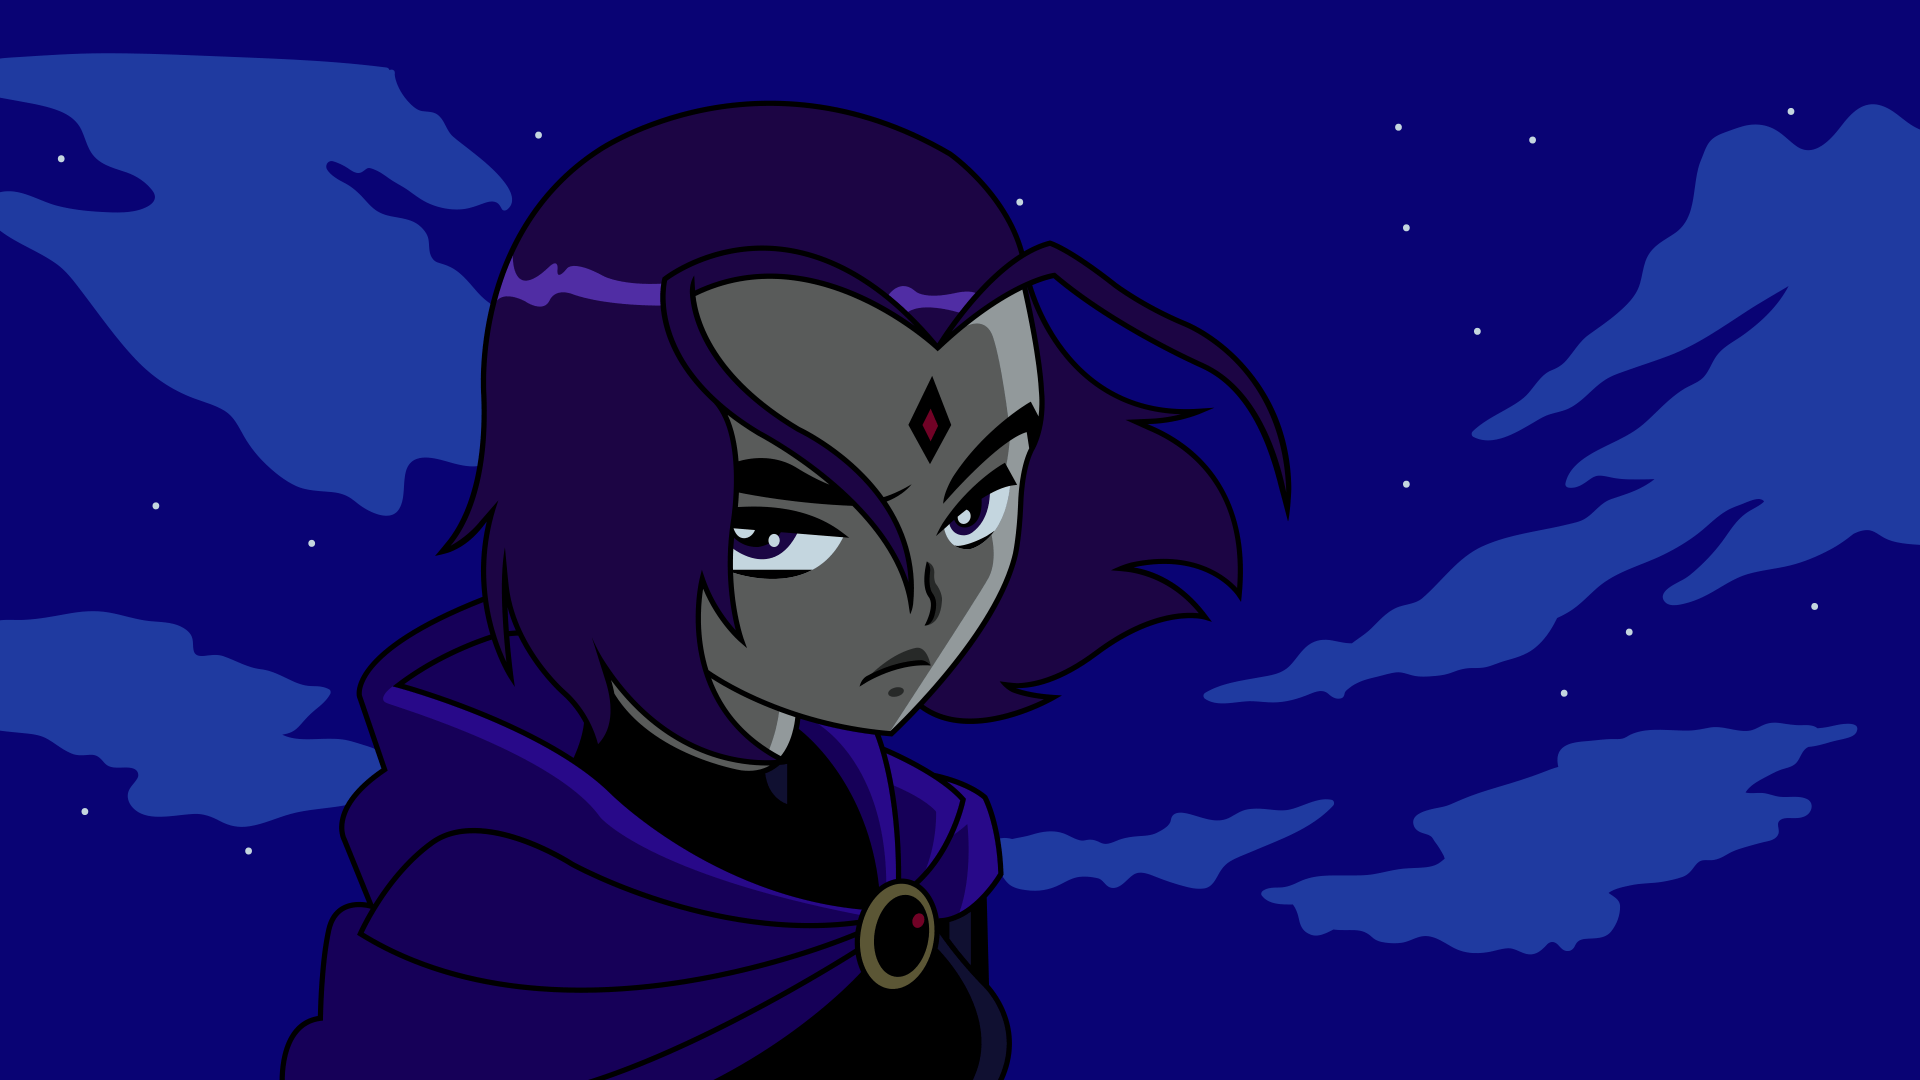 Raven from Teen Titans - wide 6